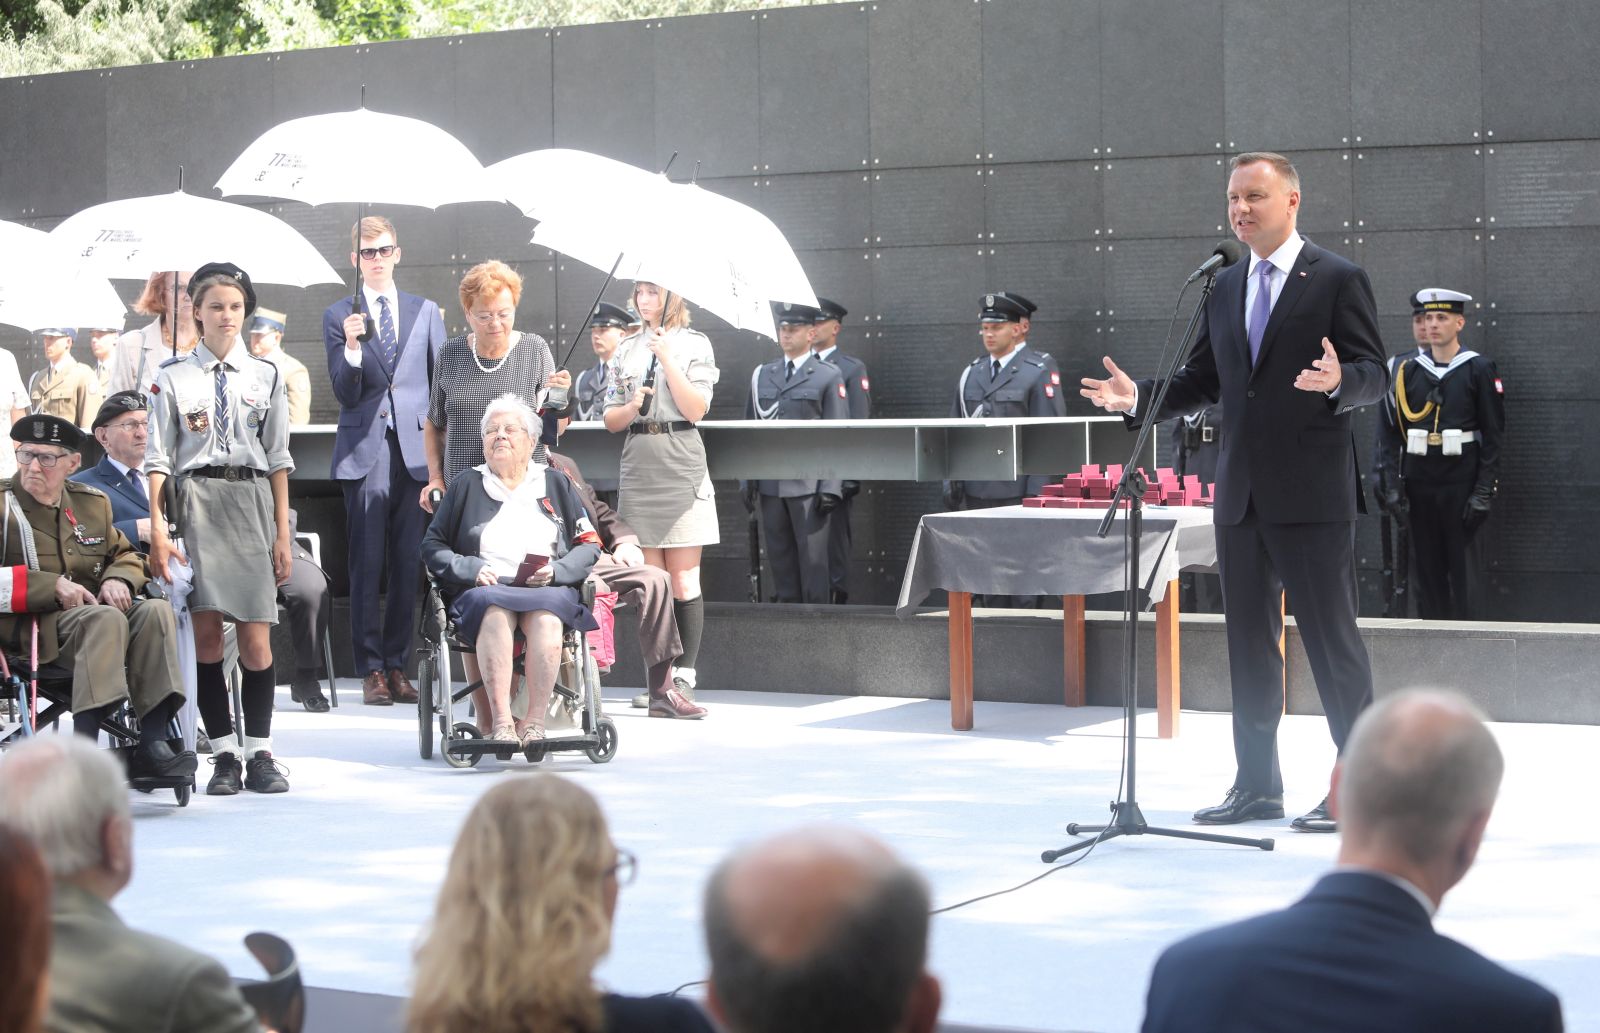 epa09379575 Polish President Andrzej Duda (R) speaks during the commemoration of the 77th anniversary of Warsaw Uprising of 1944 at the Warsaw Uprising Museum, in Warsaw, Poland, 30 July 2021. The Warsaw Uprising was an armed insurrection during the Second World War organized by the Polish underground resistance, led by Home Army (AK), against the Nazi occupation of Poland.  EPA/Wojciech Olkusnik POLAND OUT